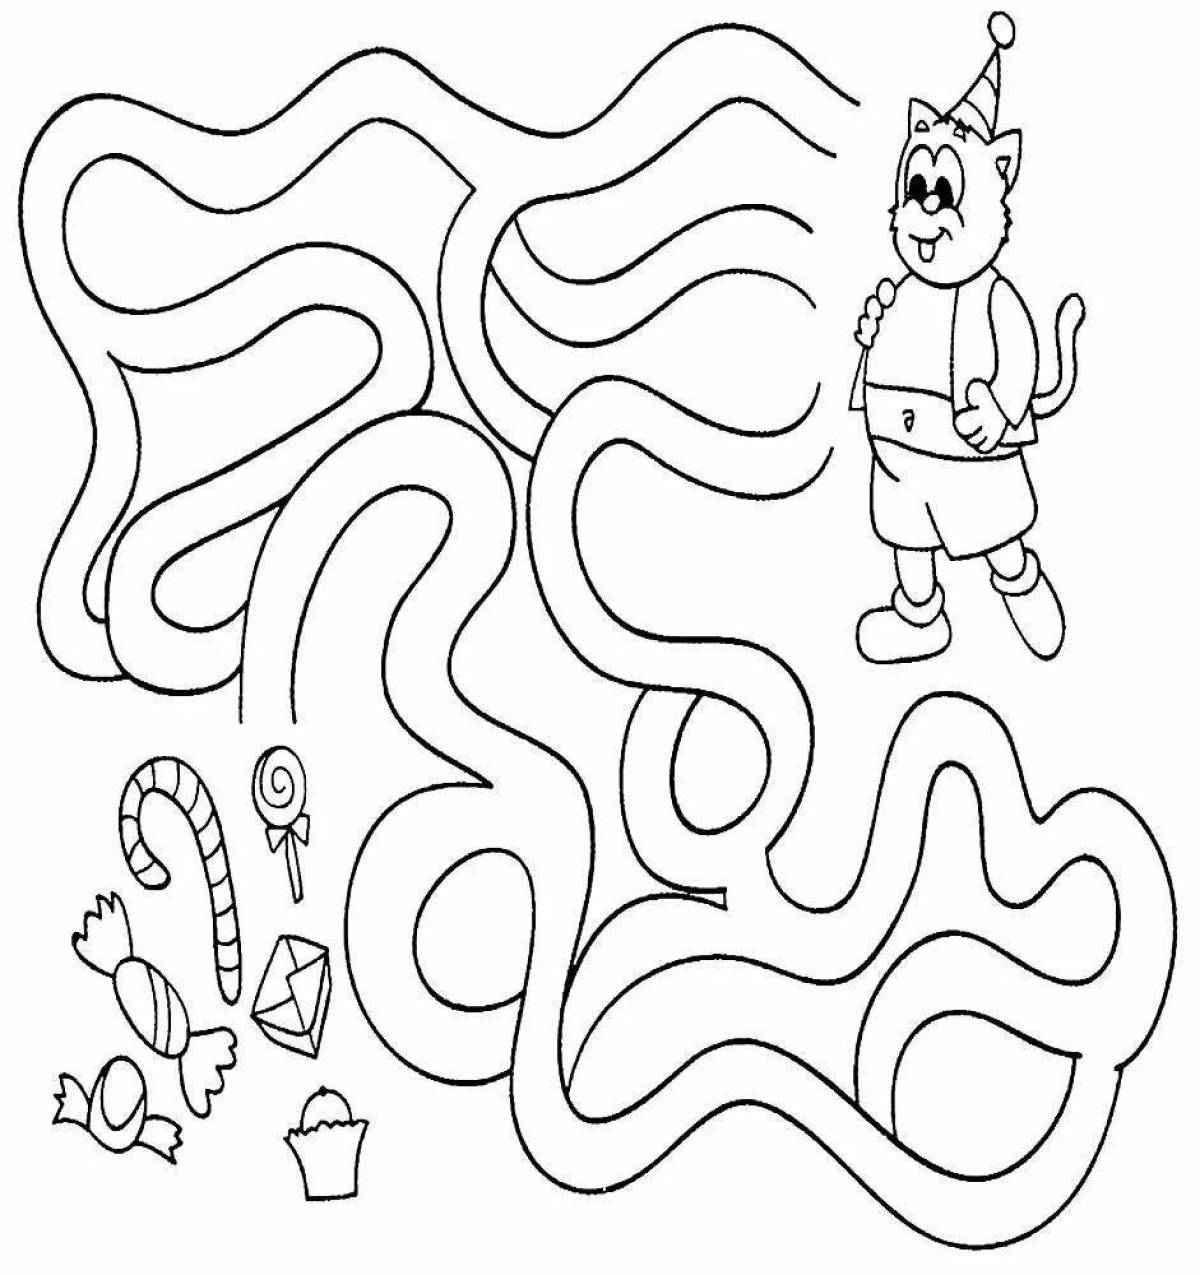 Fun coloring games for 4-5 year olds